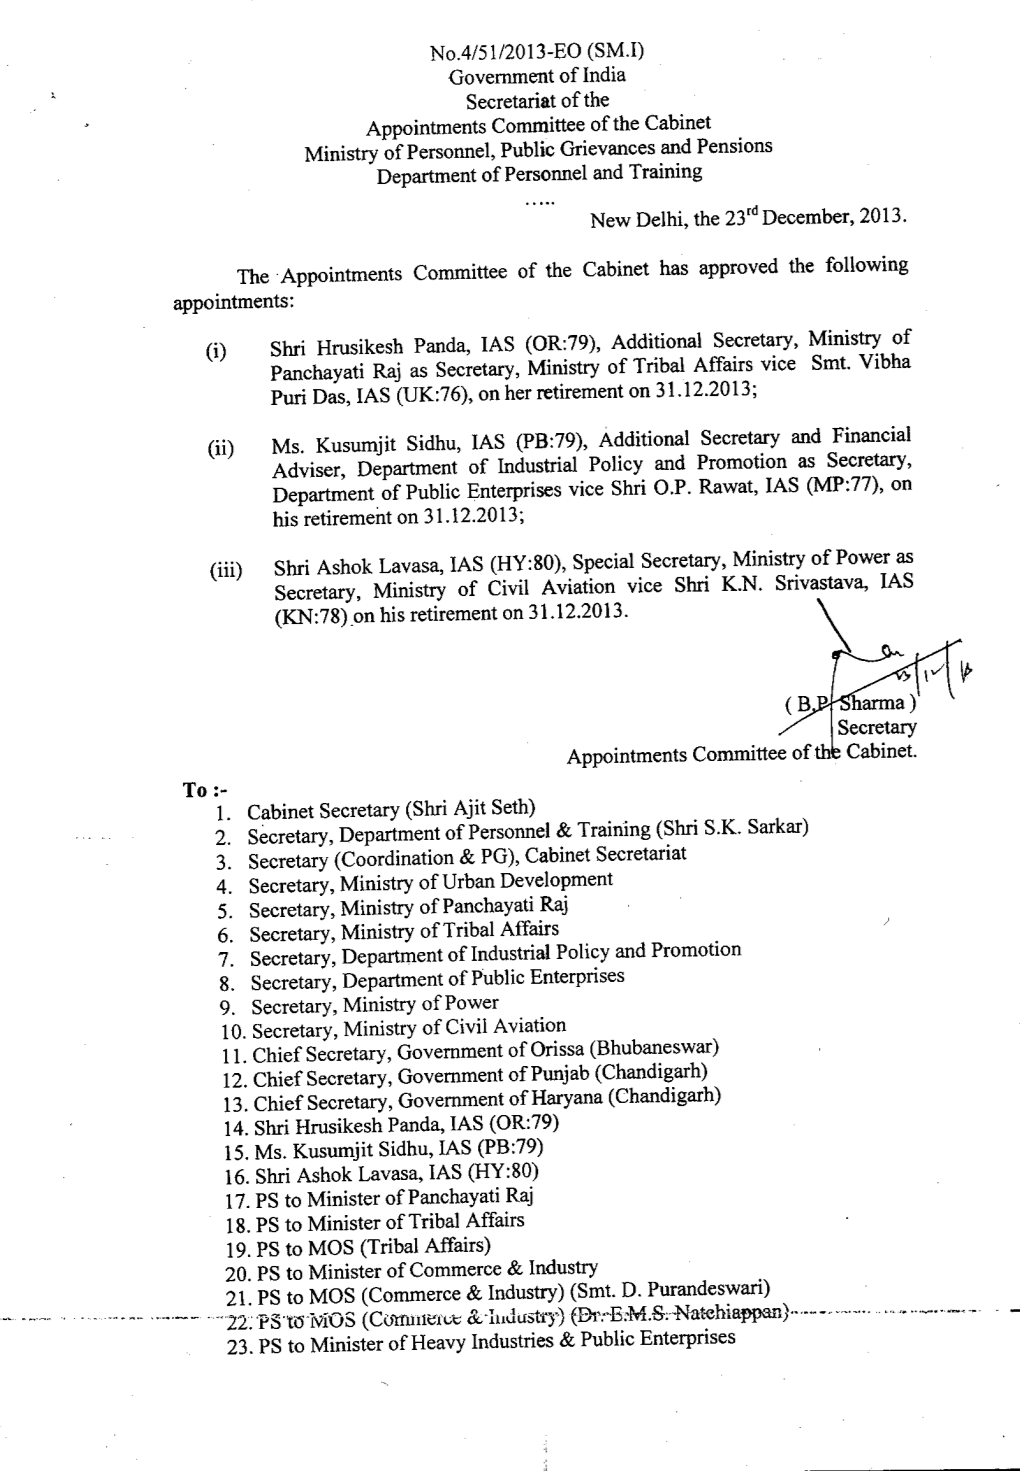 No.4/5 1/2013-EO (SM.I) Government of India Secretariat of the Appointments Committee of the Cabinet Ministry of Personnel, Publ